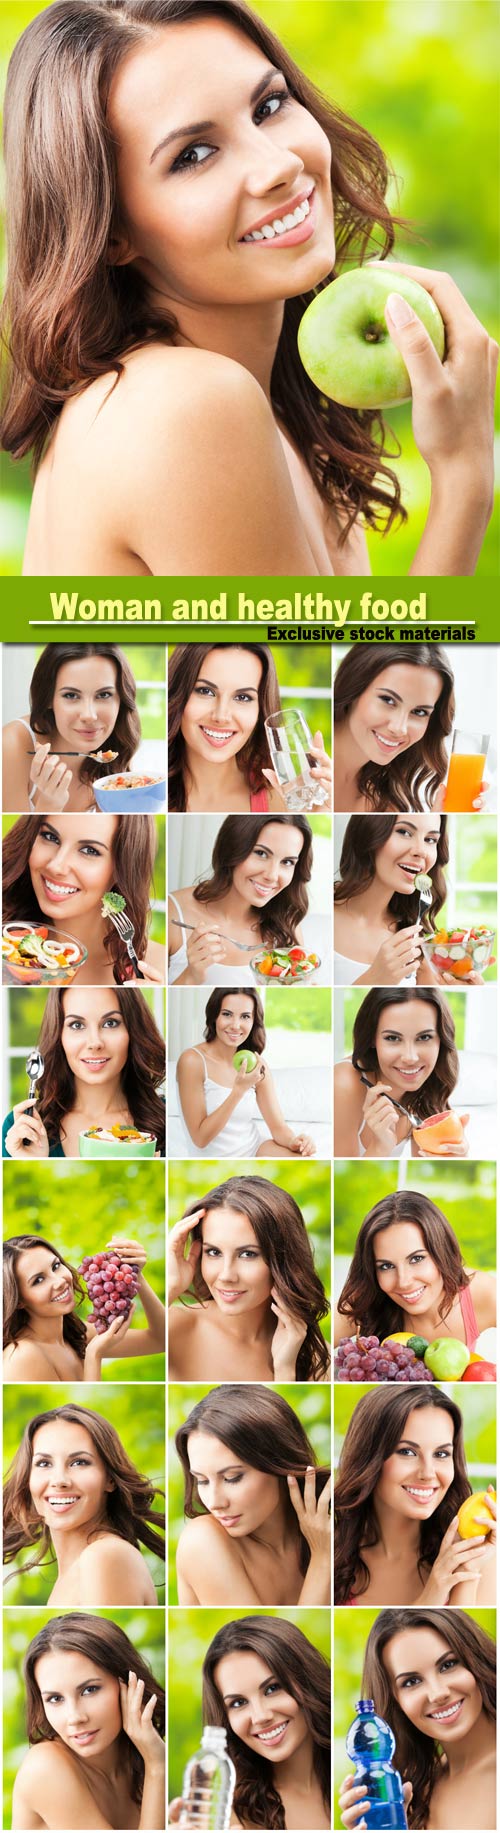 Beautiful woman and healthy food